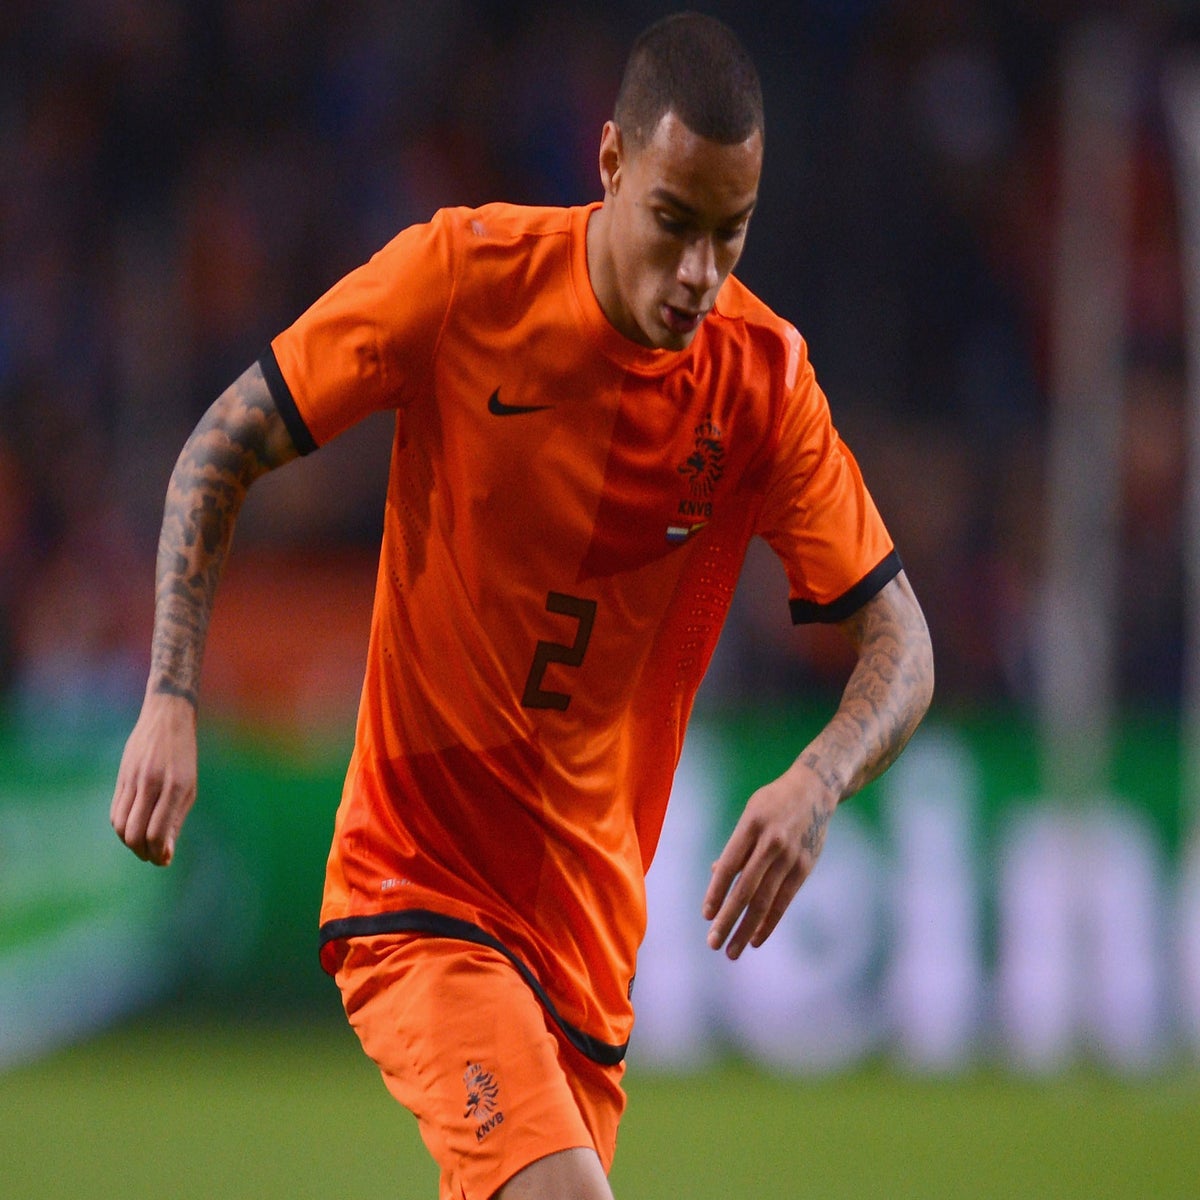 ROAD TO GLORY WAGER MATCHES NETHERLANDS, VAN DER WIEL #3